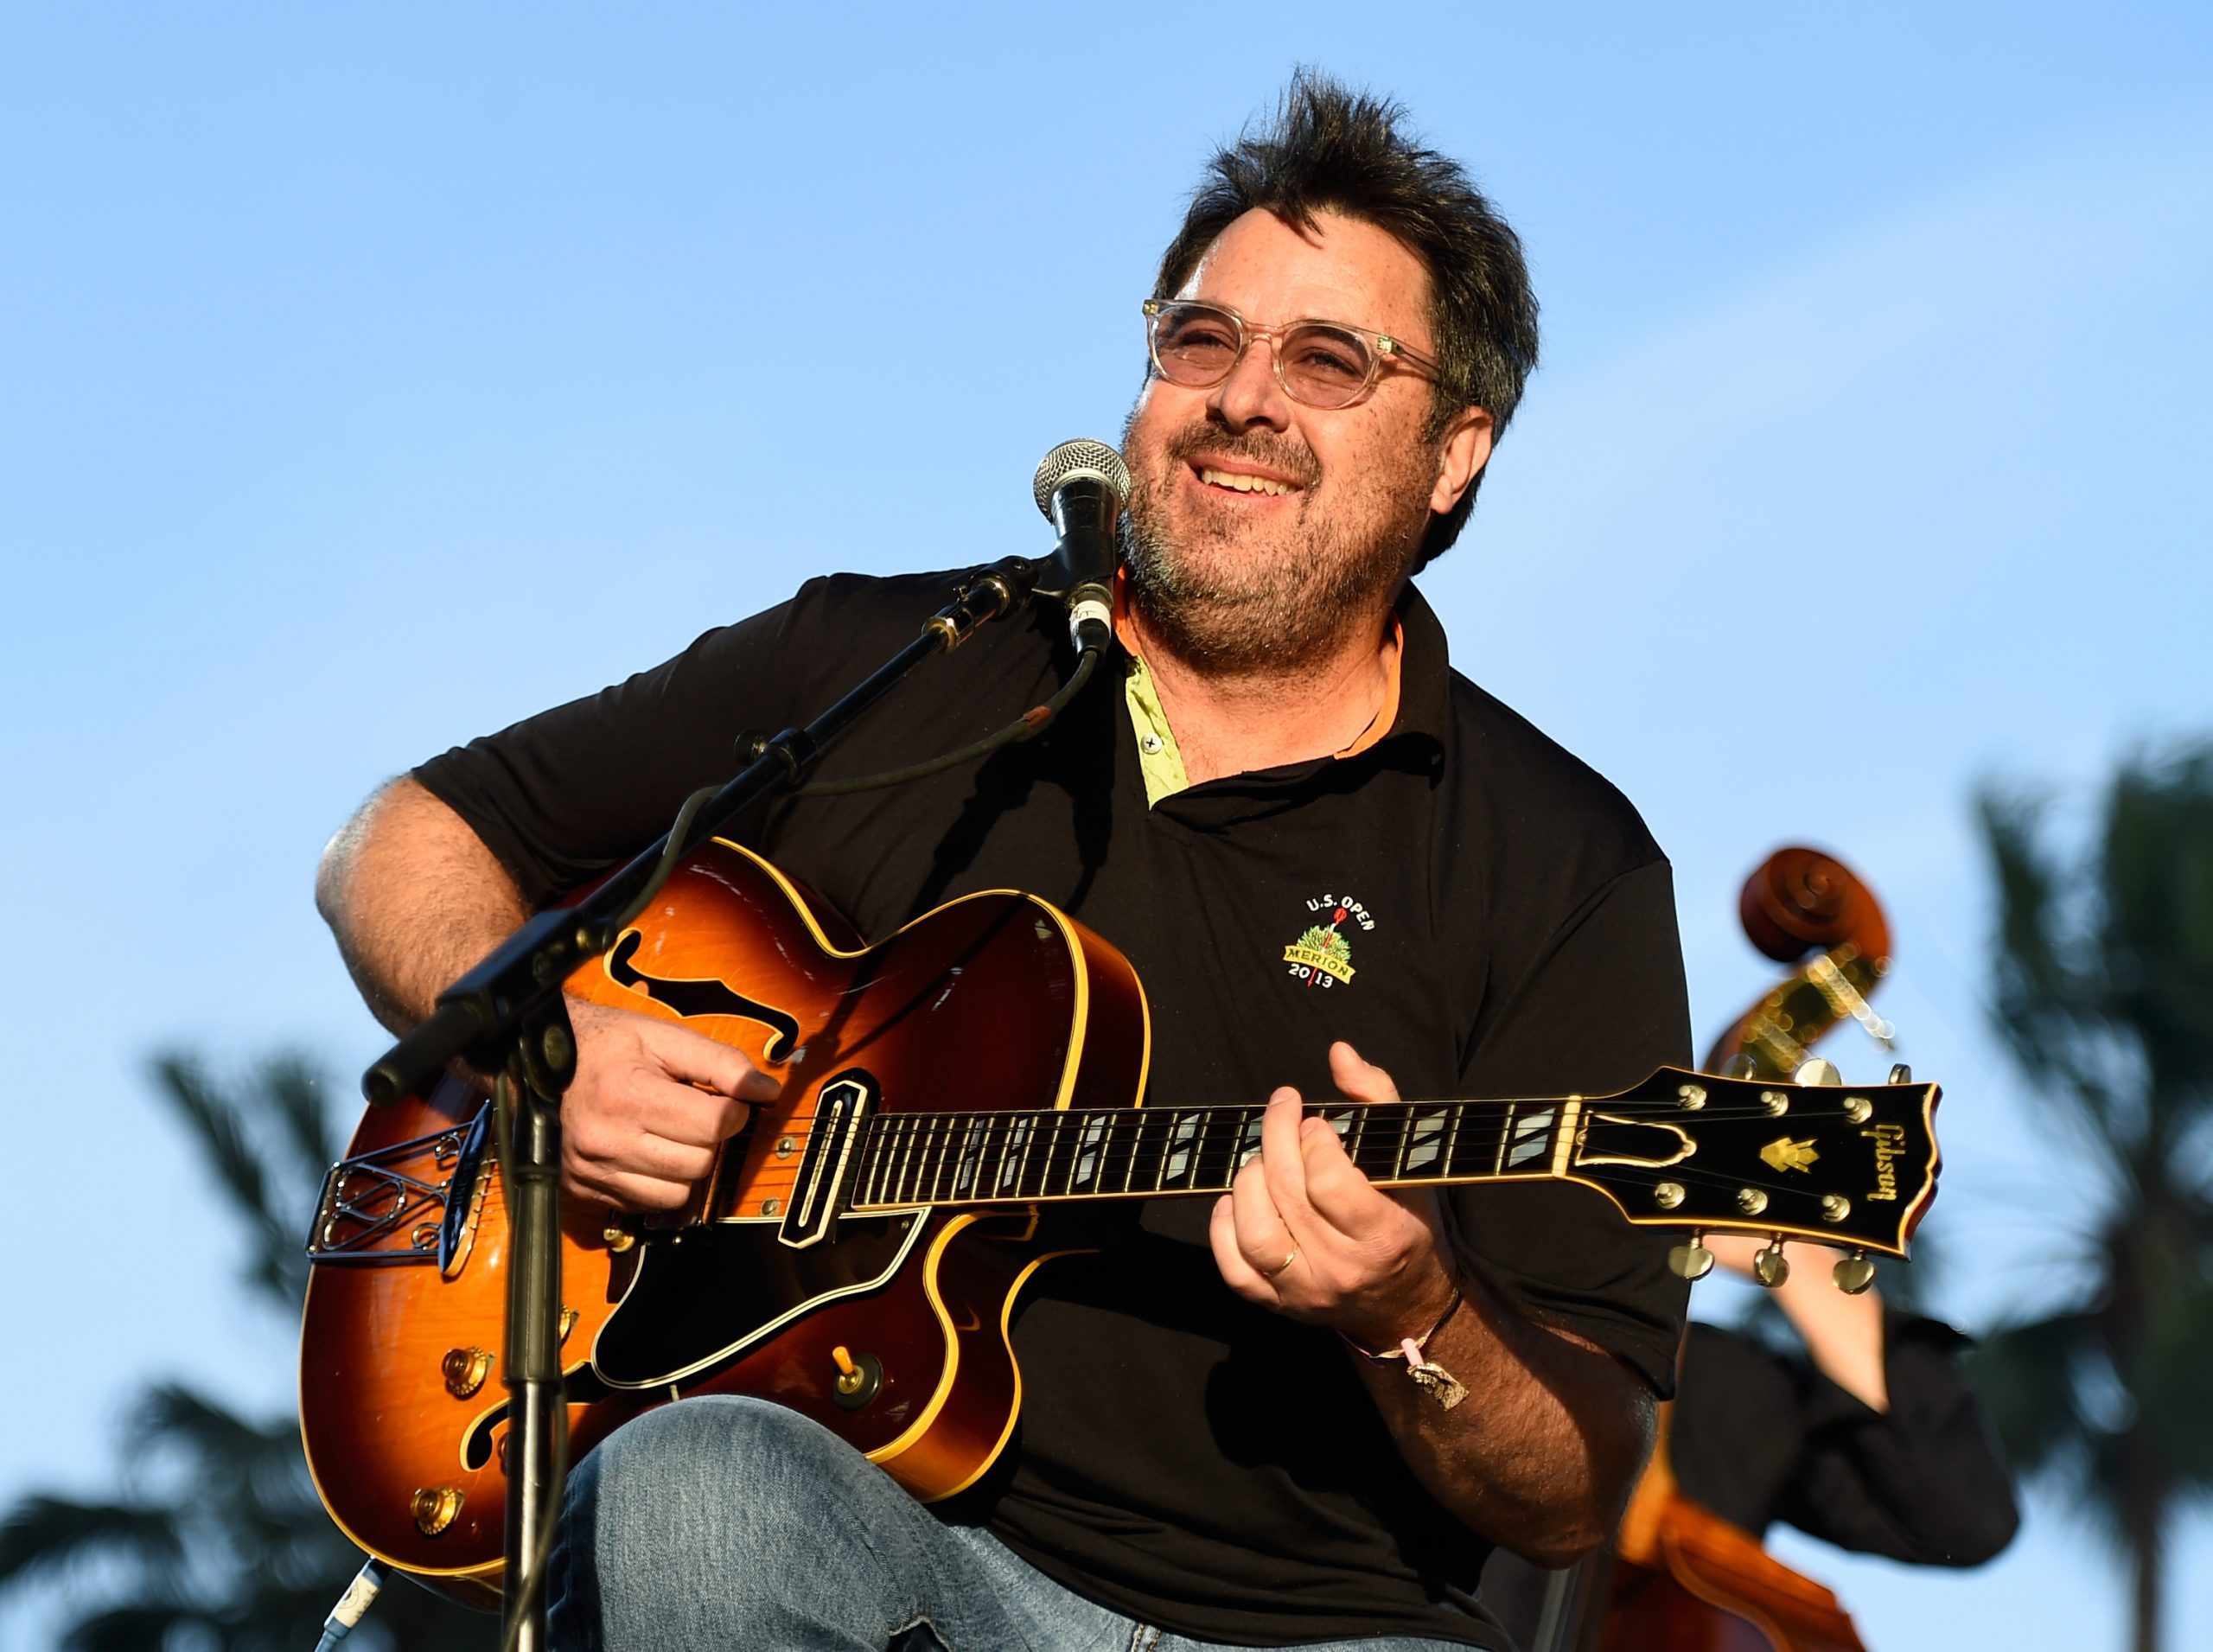 Vince Gill photo